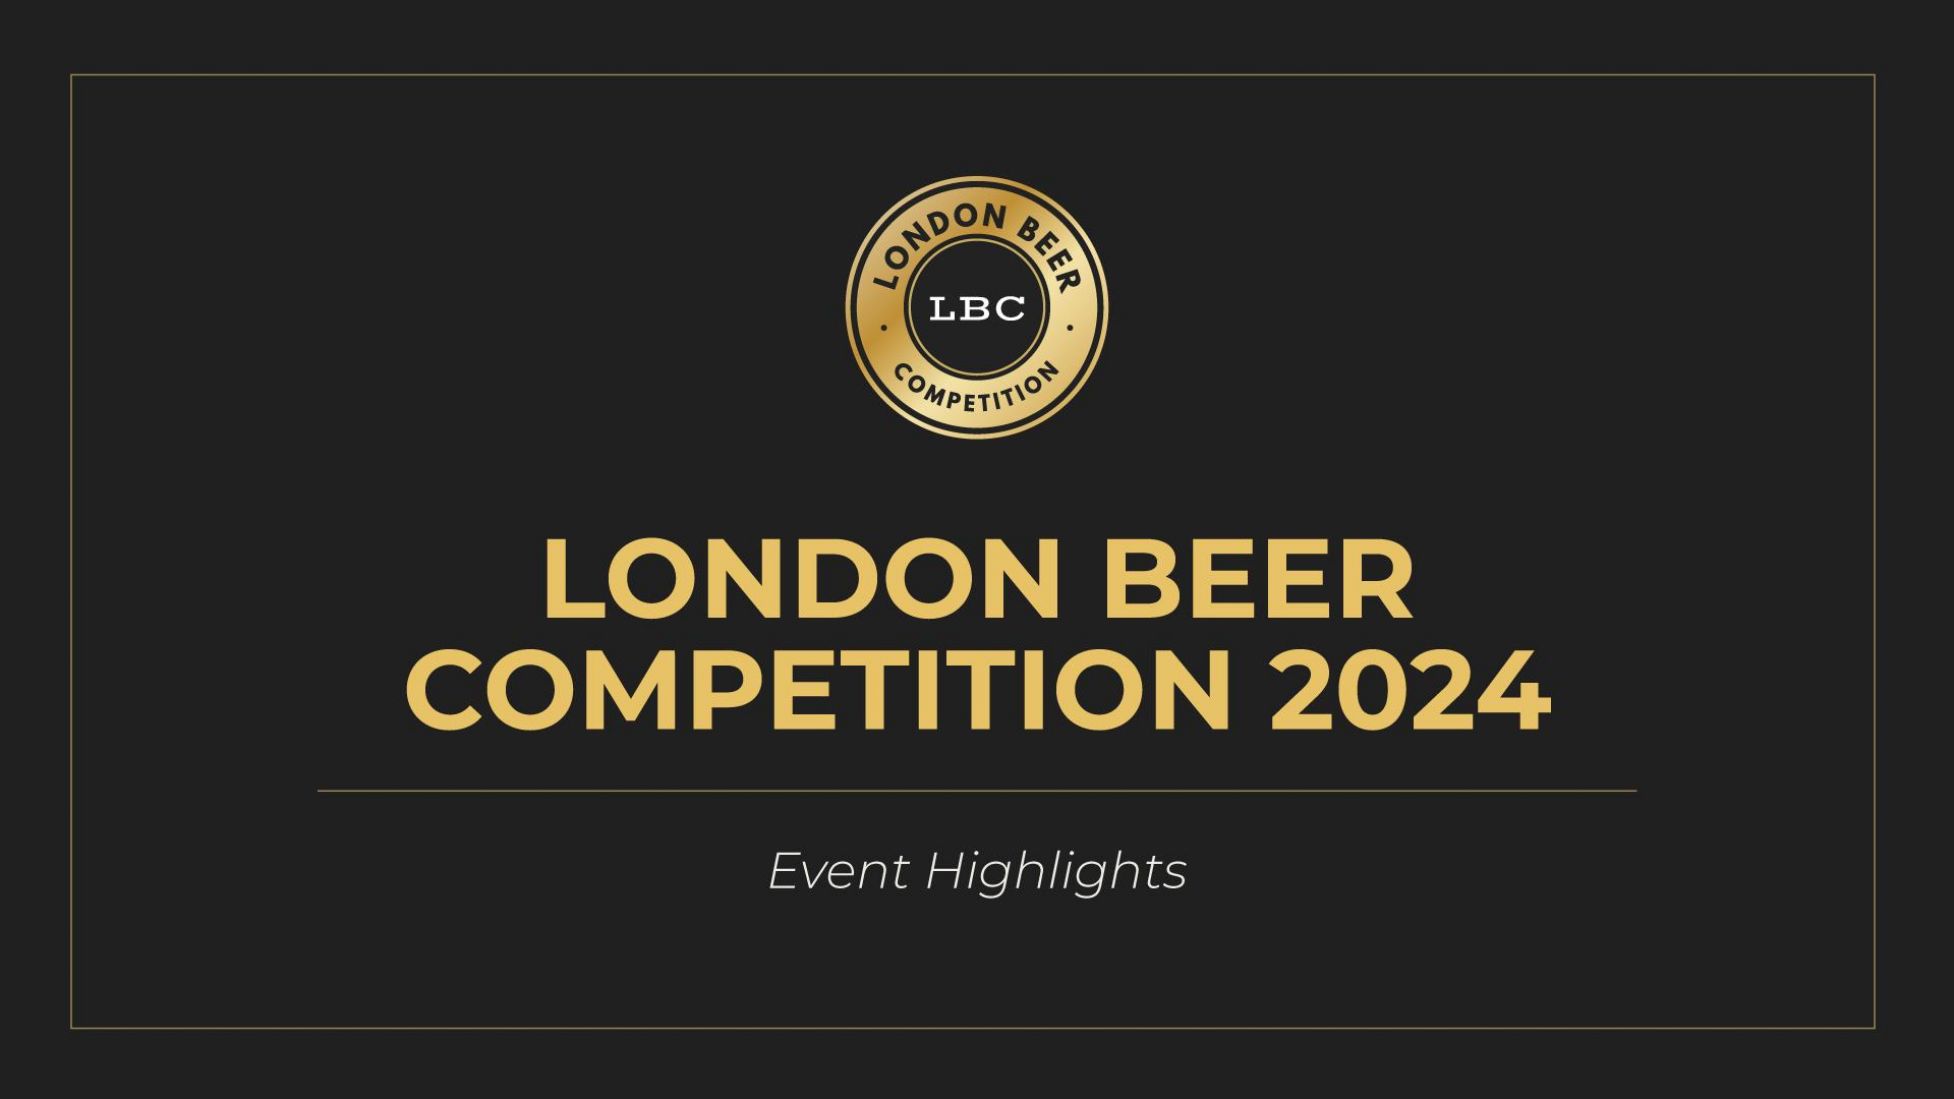 Photo for: 2024 London Beer Competitions | Event Highlights